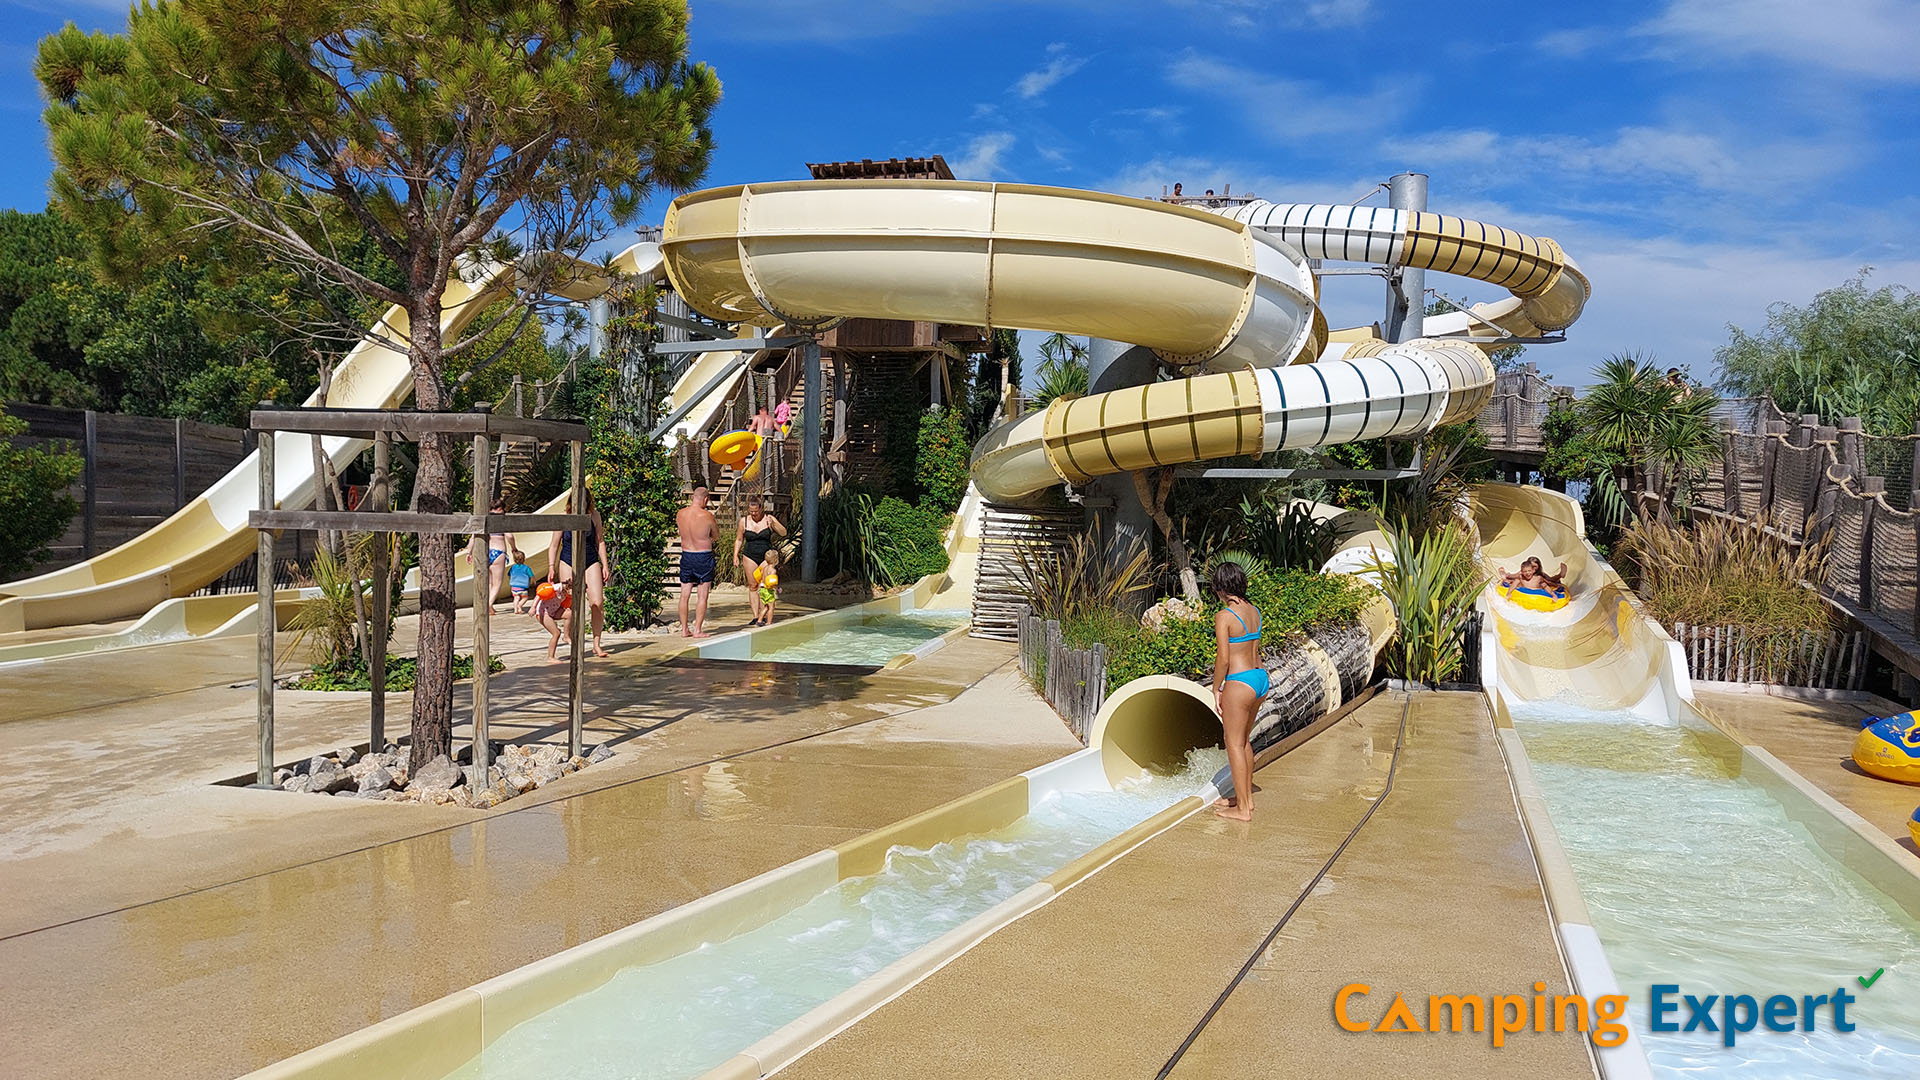 Camping Languedoc-Roussillon am Meer - camping La Sérignan Plage